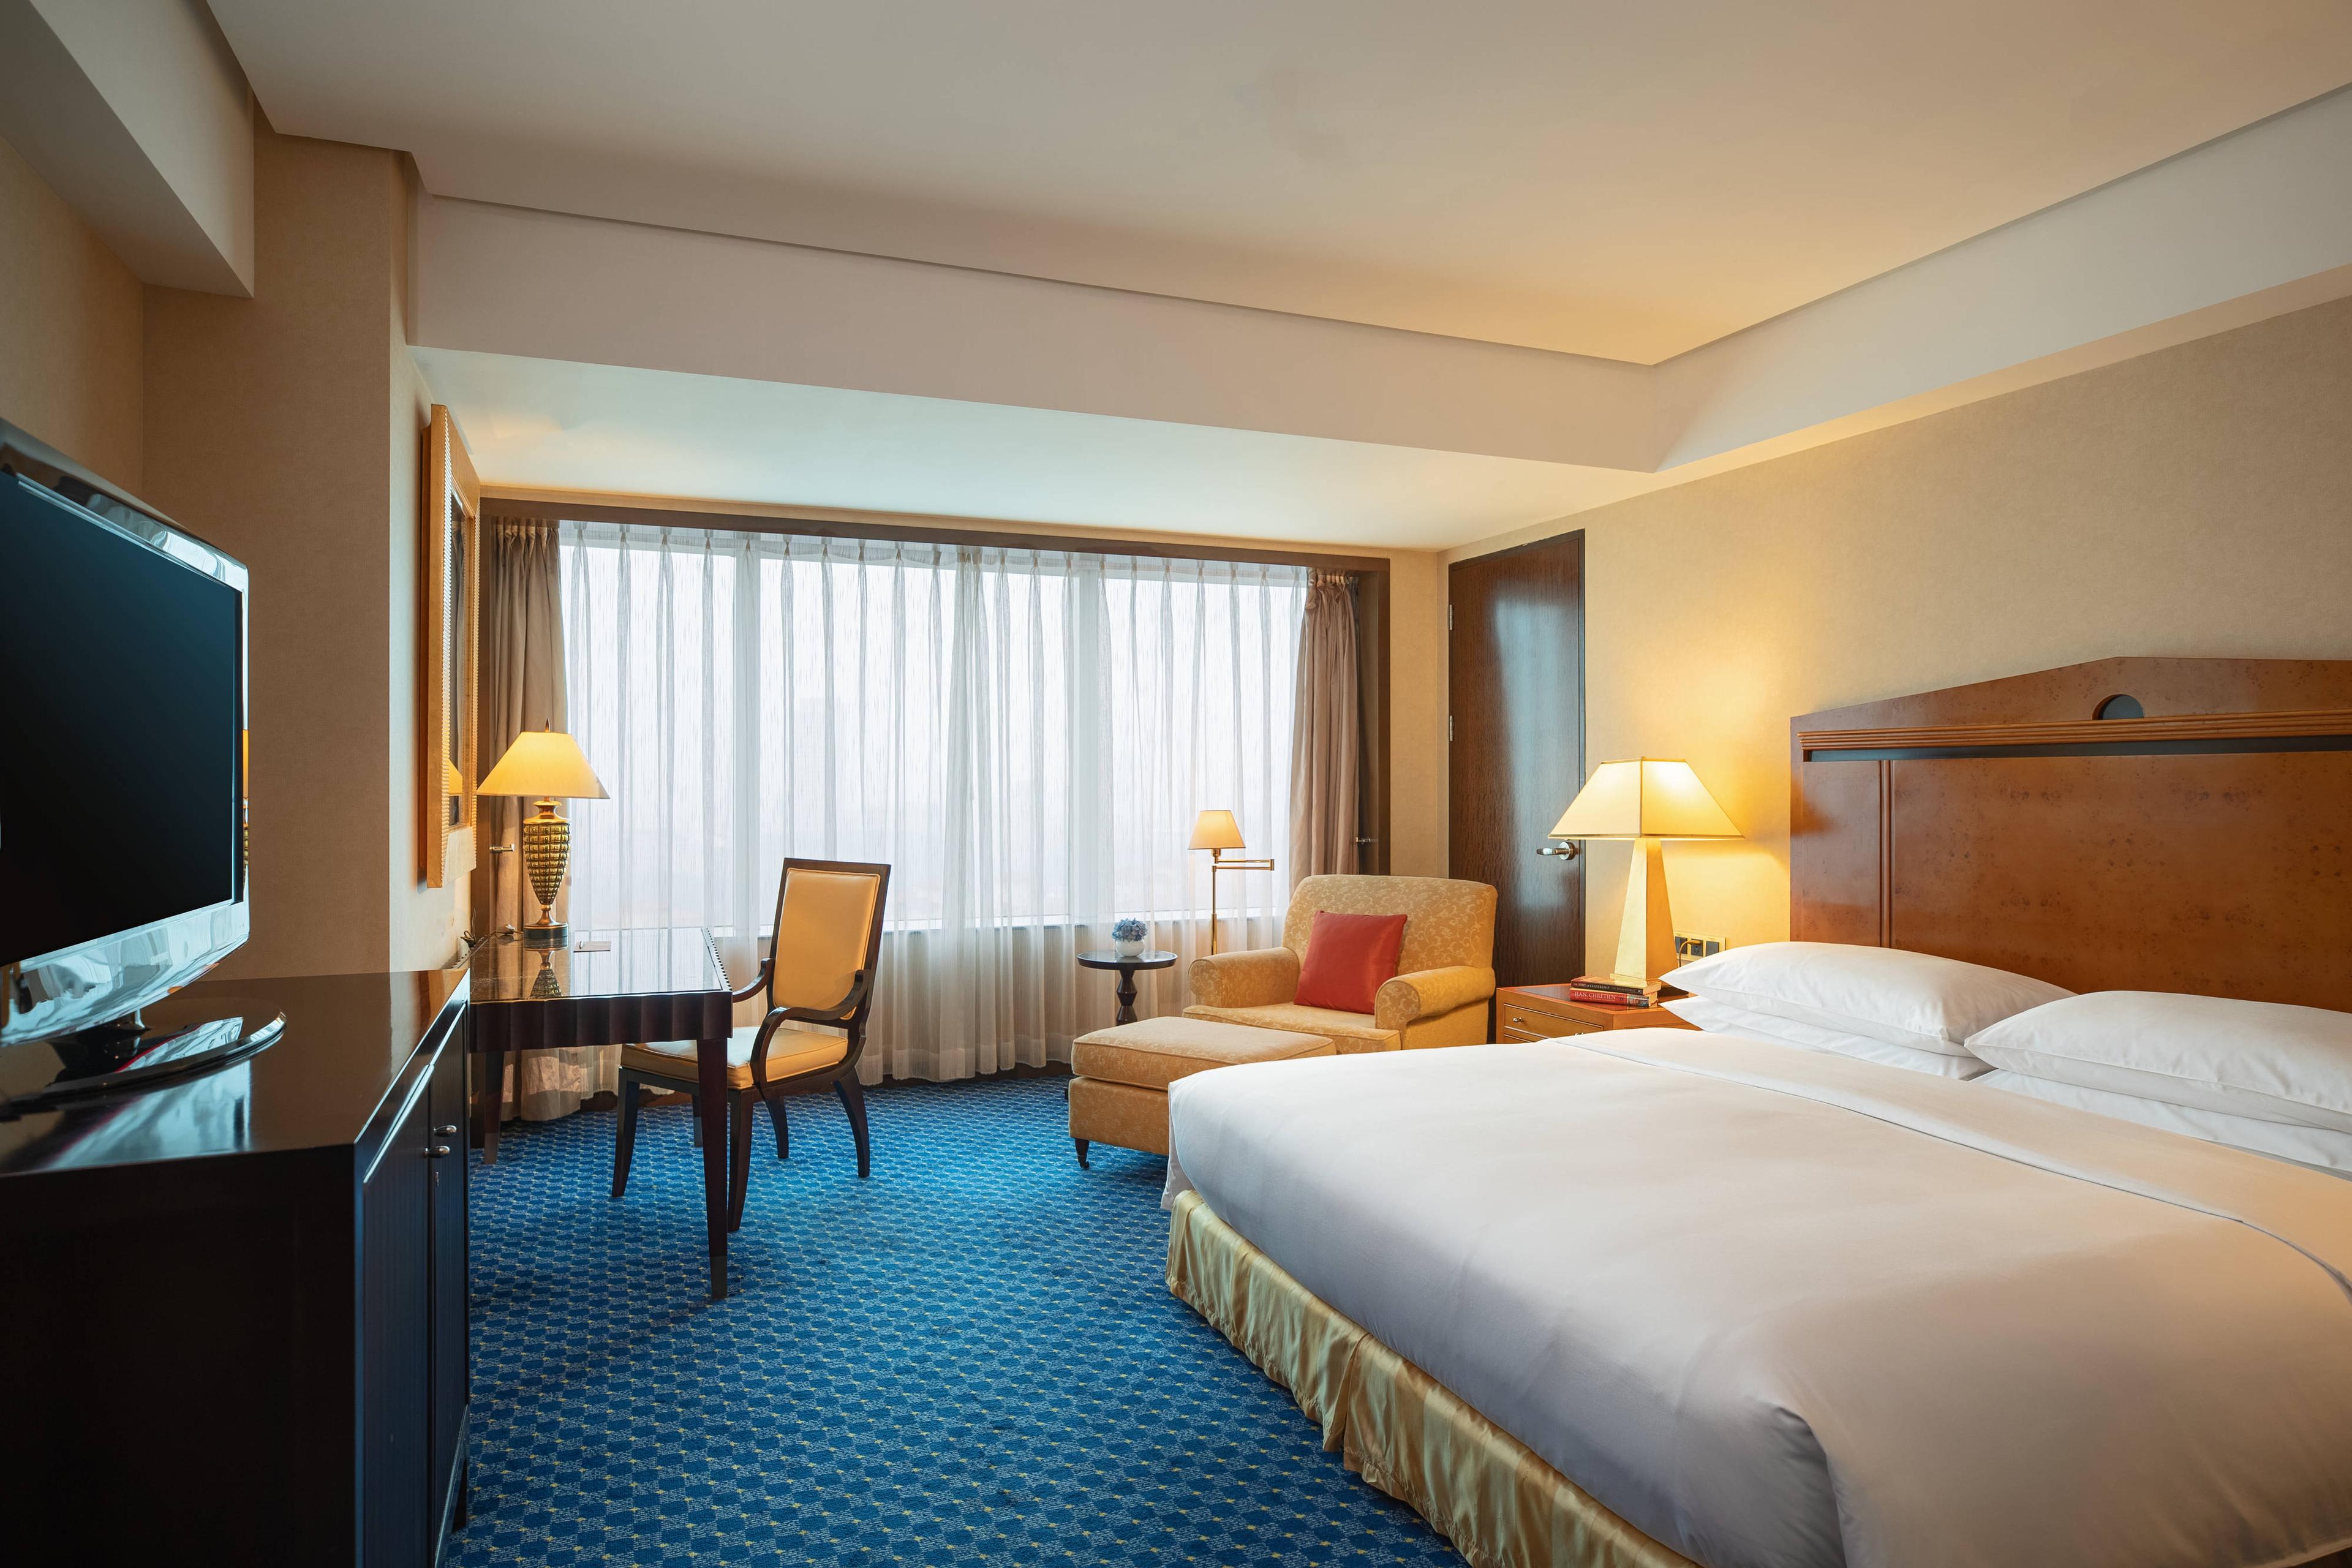 The deluxe king room is spacious and comfortable with a king bed, access to high-speed Internet, user-friendly working area and relaxing shower and bathtub.